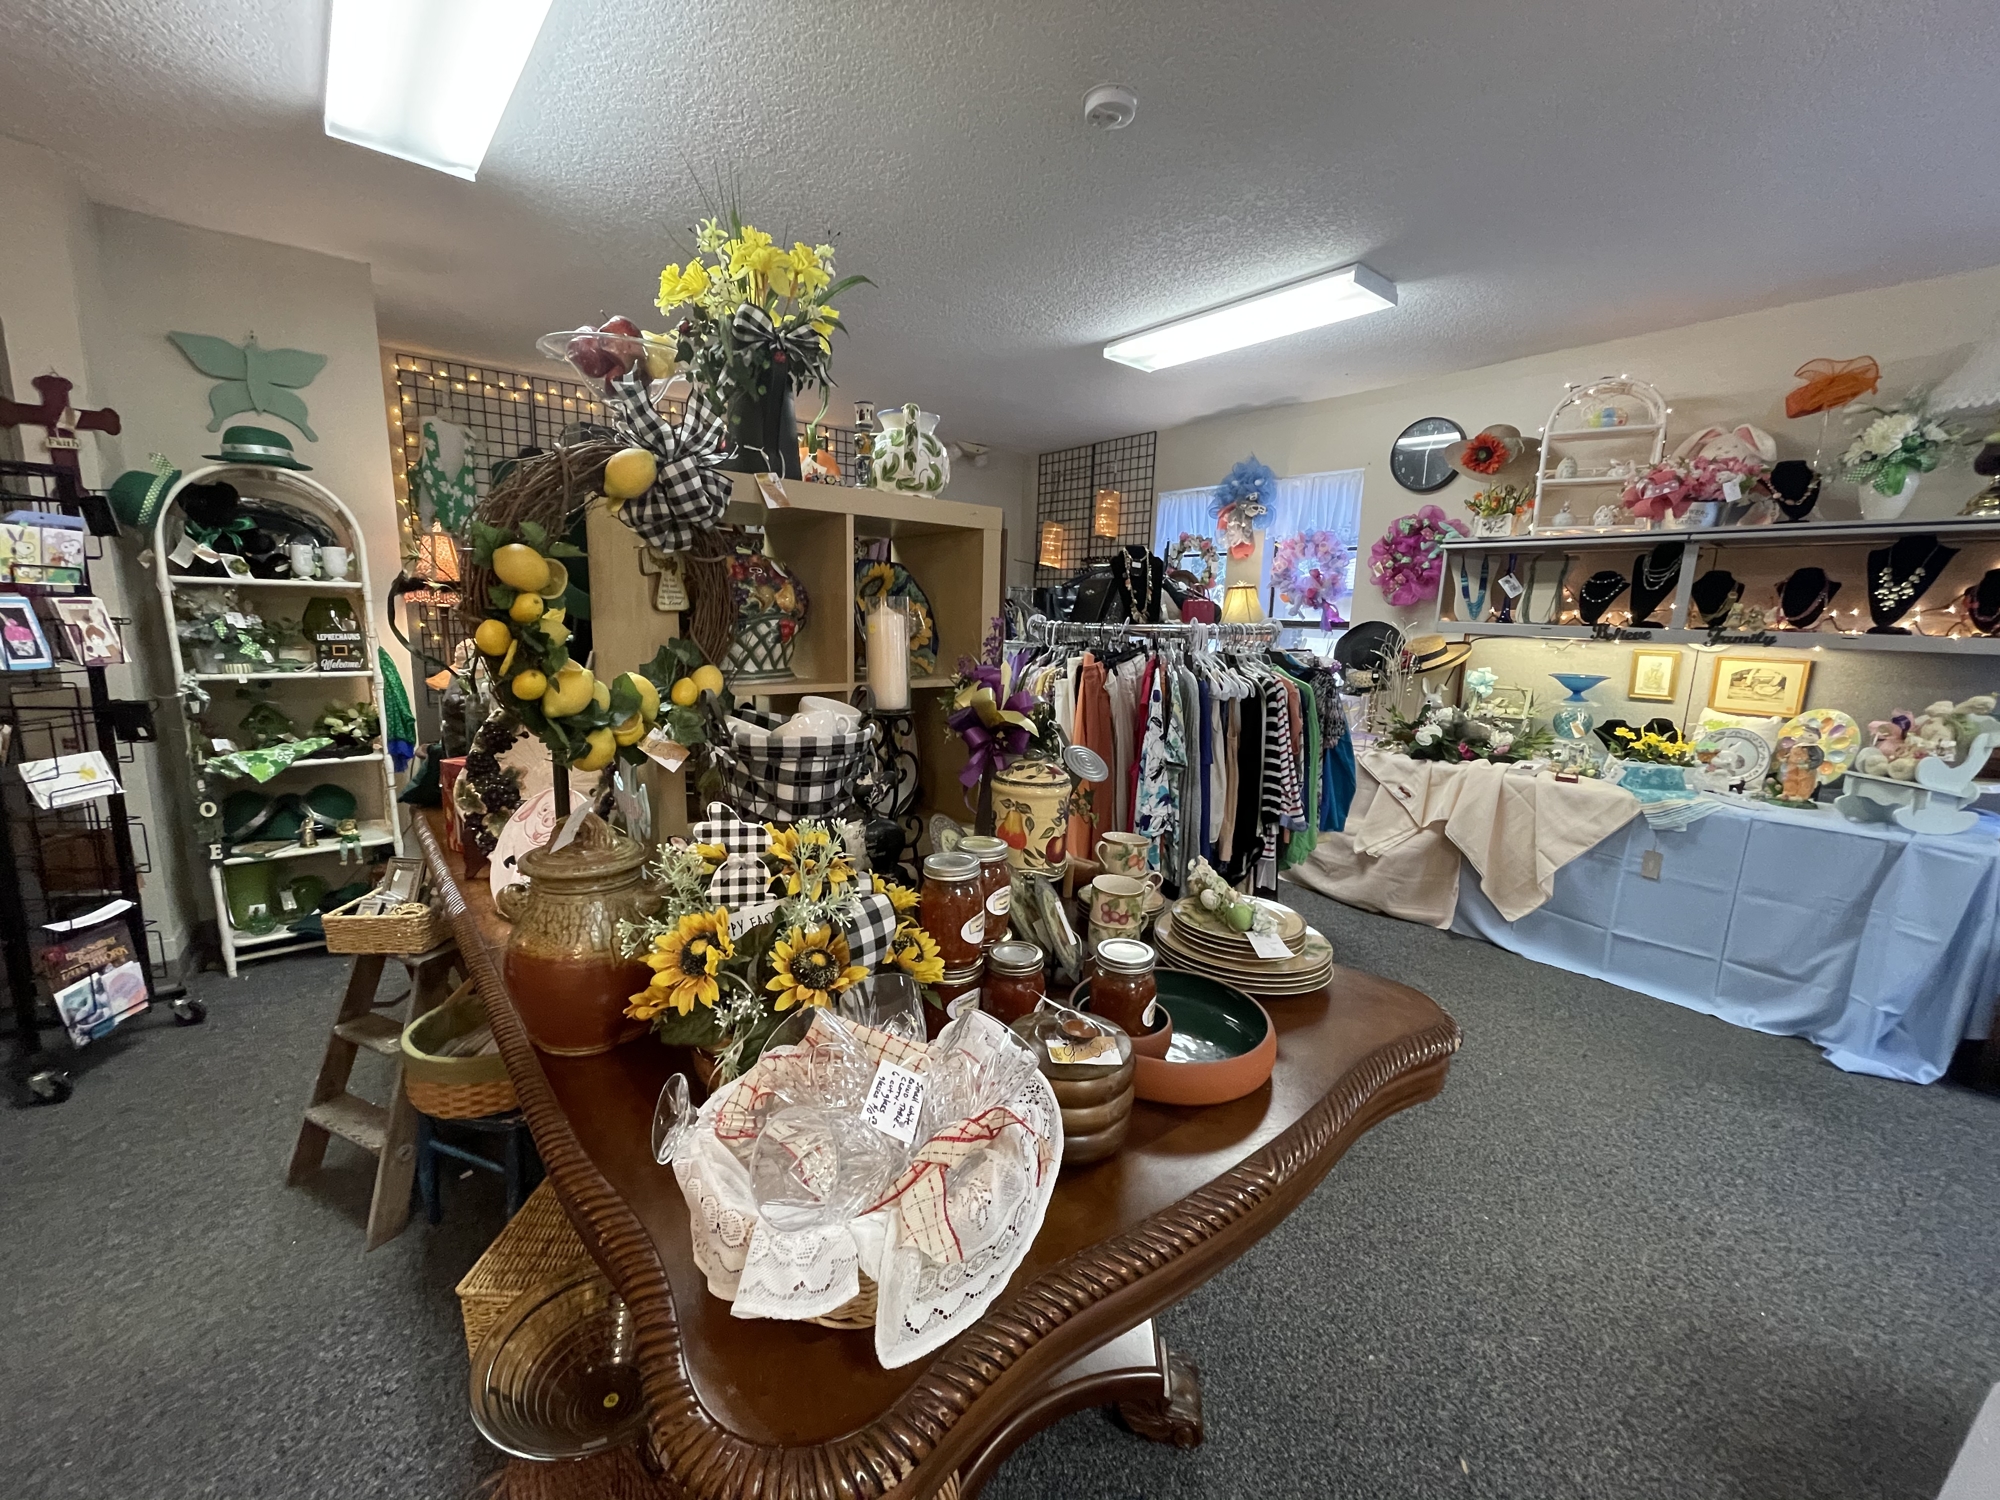 The gift shop features home décor, women’s clothing, jewelry, handmade items and more.